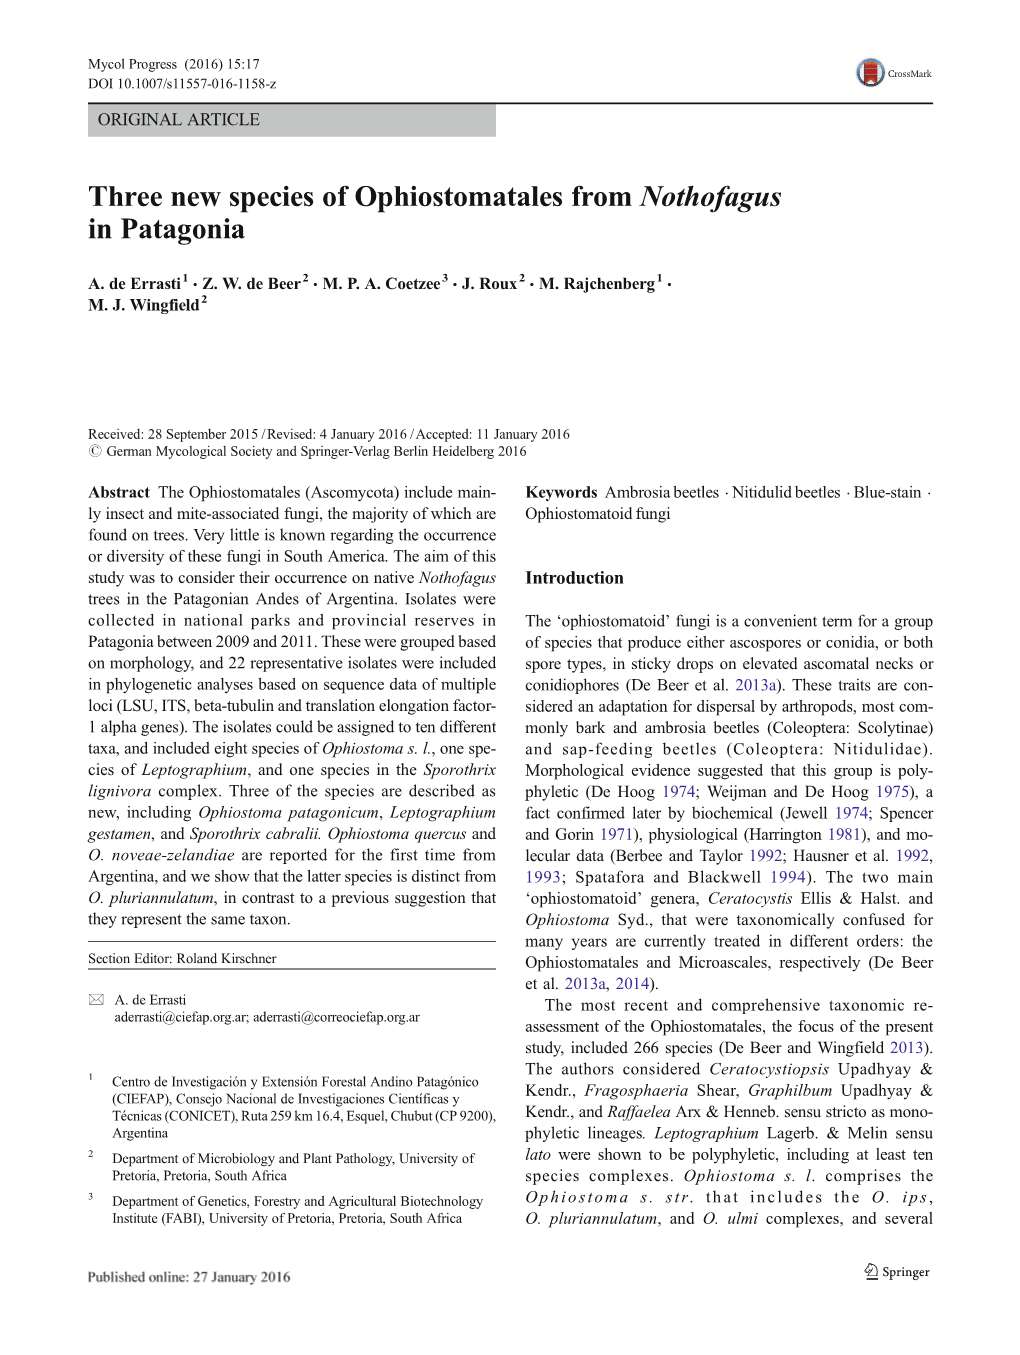 Three New Species of Ophiostomatales from Nothofagus in Patagonia